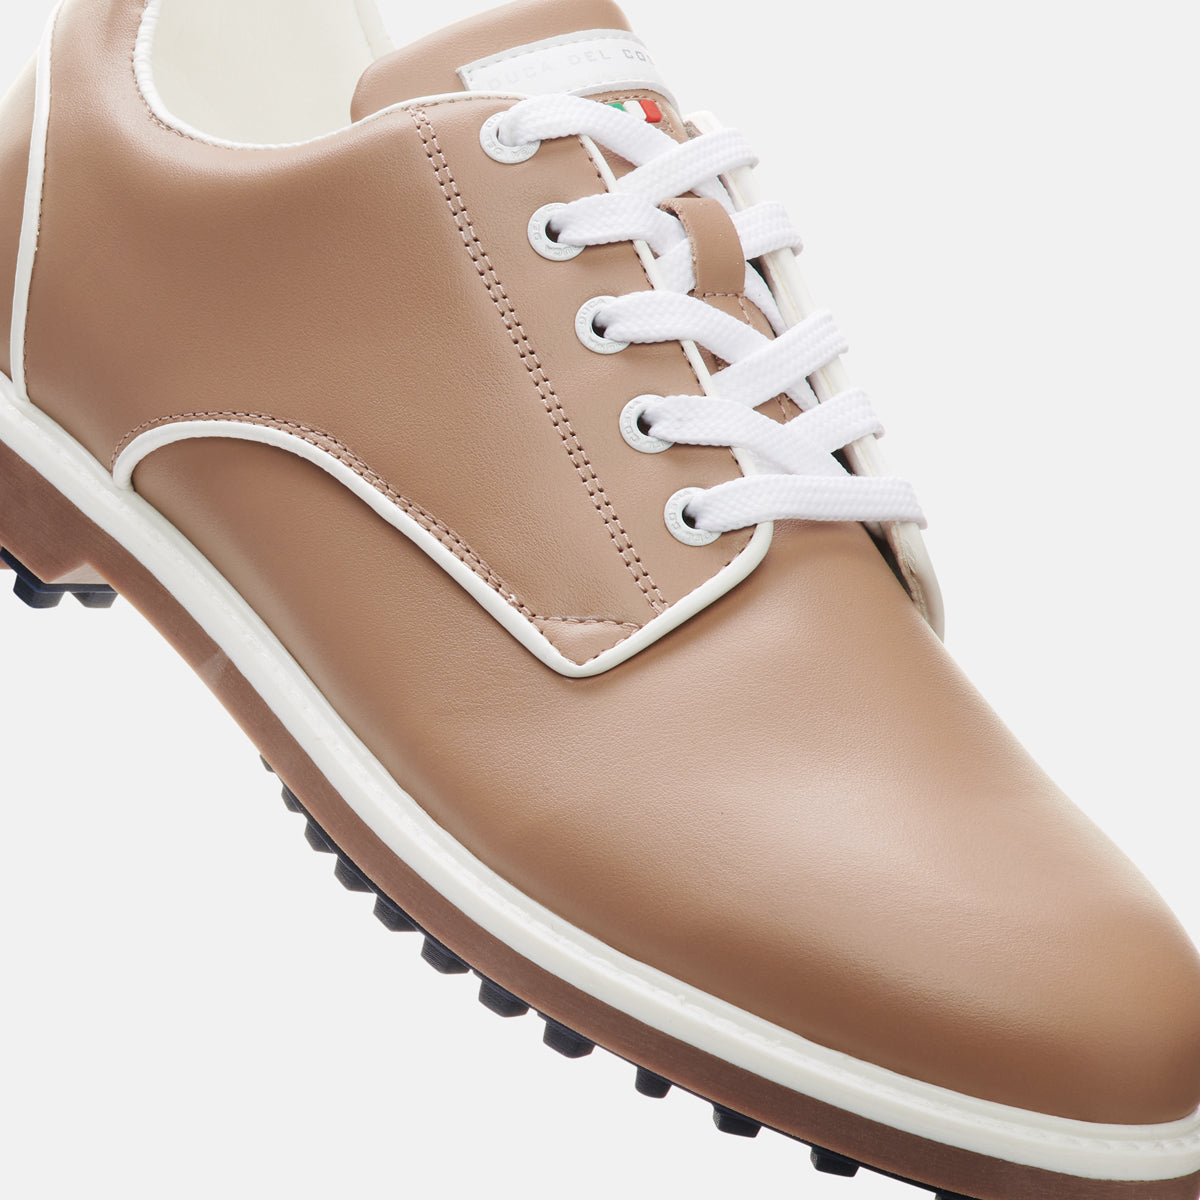 Elpaso taupe mens Golf Shoes Duca del Cosma Waterproof best golf shoe for the golf course